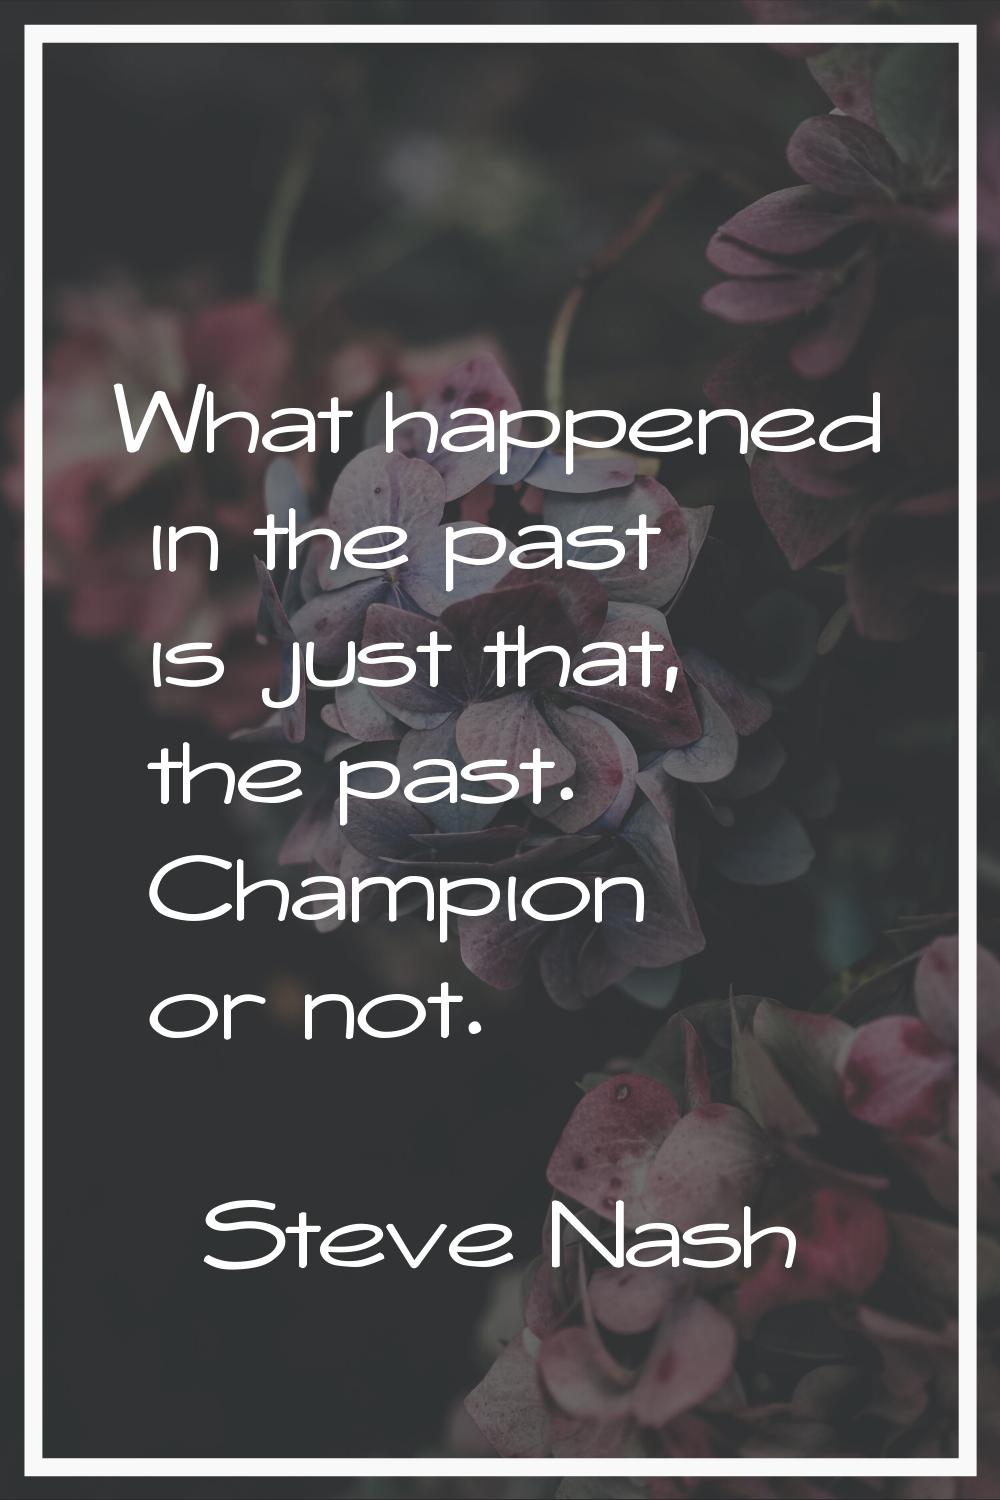 What happened in the past is just that, the past. Champion or not.